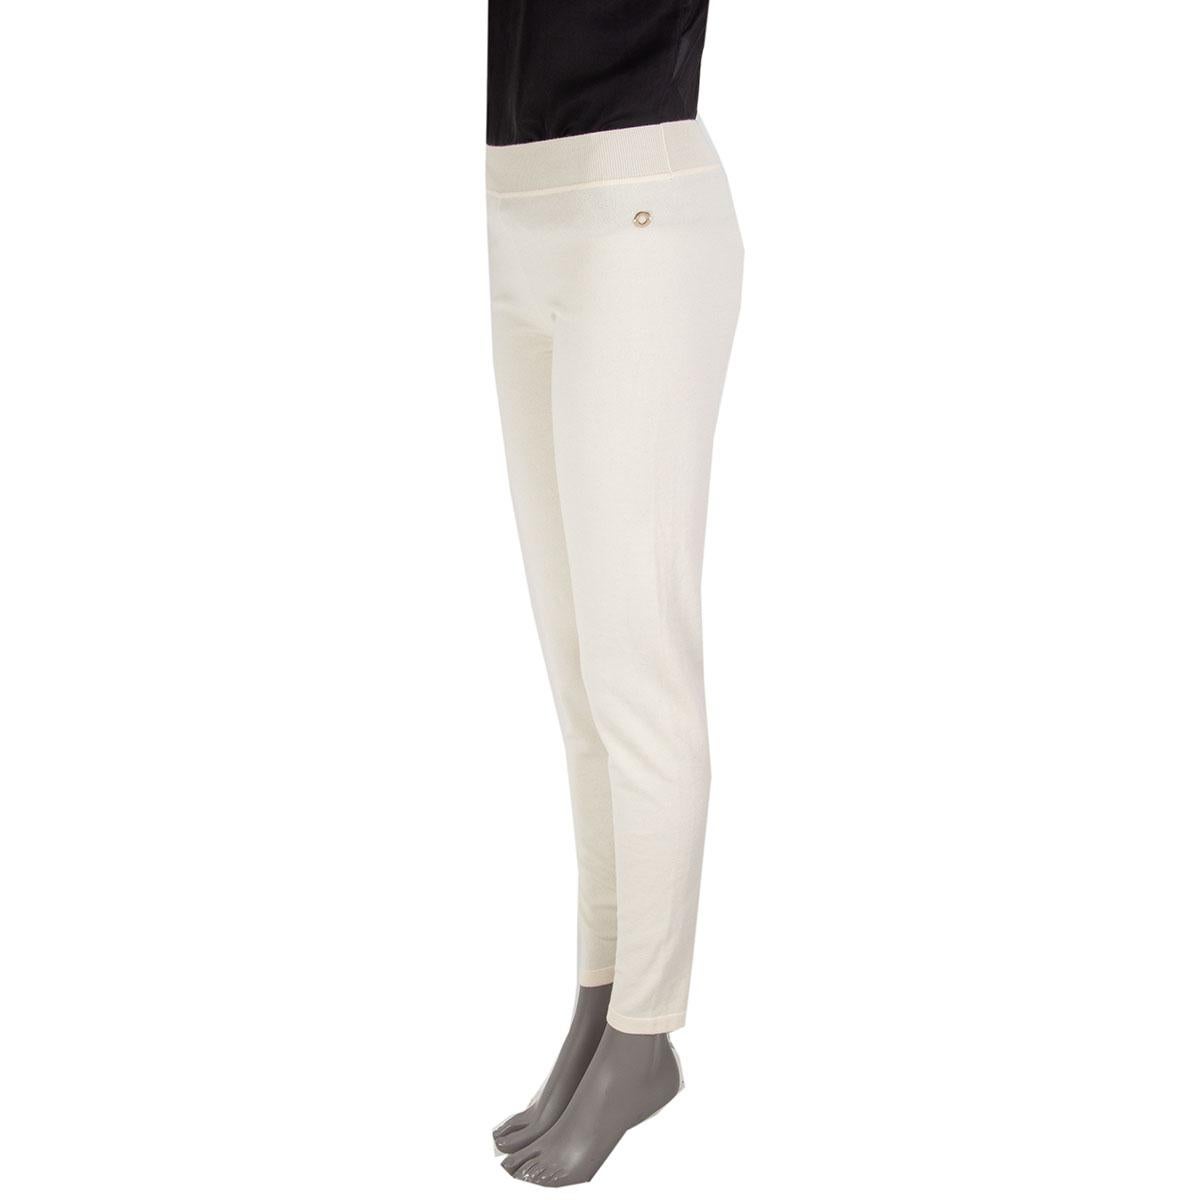 100% authentic Loro Piana 'Thompson' leggings in cream cashmere (86%) polyester (14%) with a ribbed waist-band and a tapered leg. Unlined. Has been worn and is in excellent condition.

Measurements
Tag Size	44
Size	L
Waist	60cm (23.4in) to 70cm